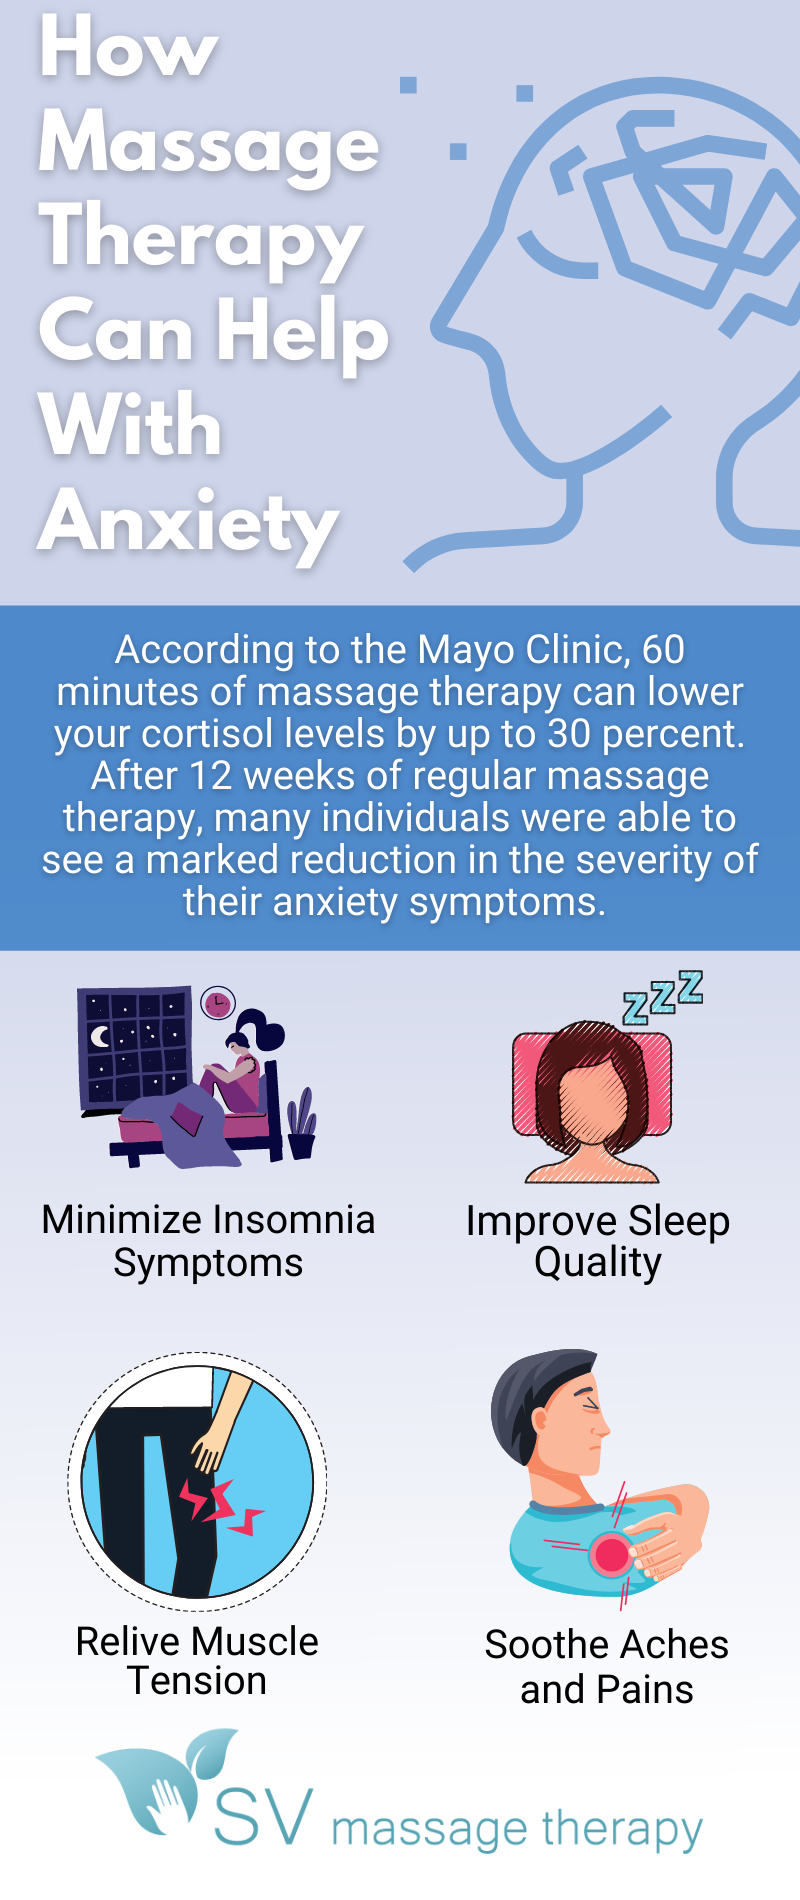 An infographic depicting, "how massage therapy can help with anxiety."